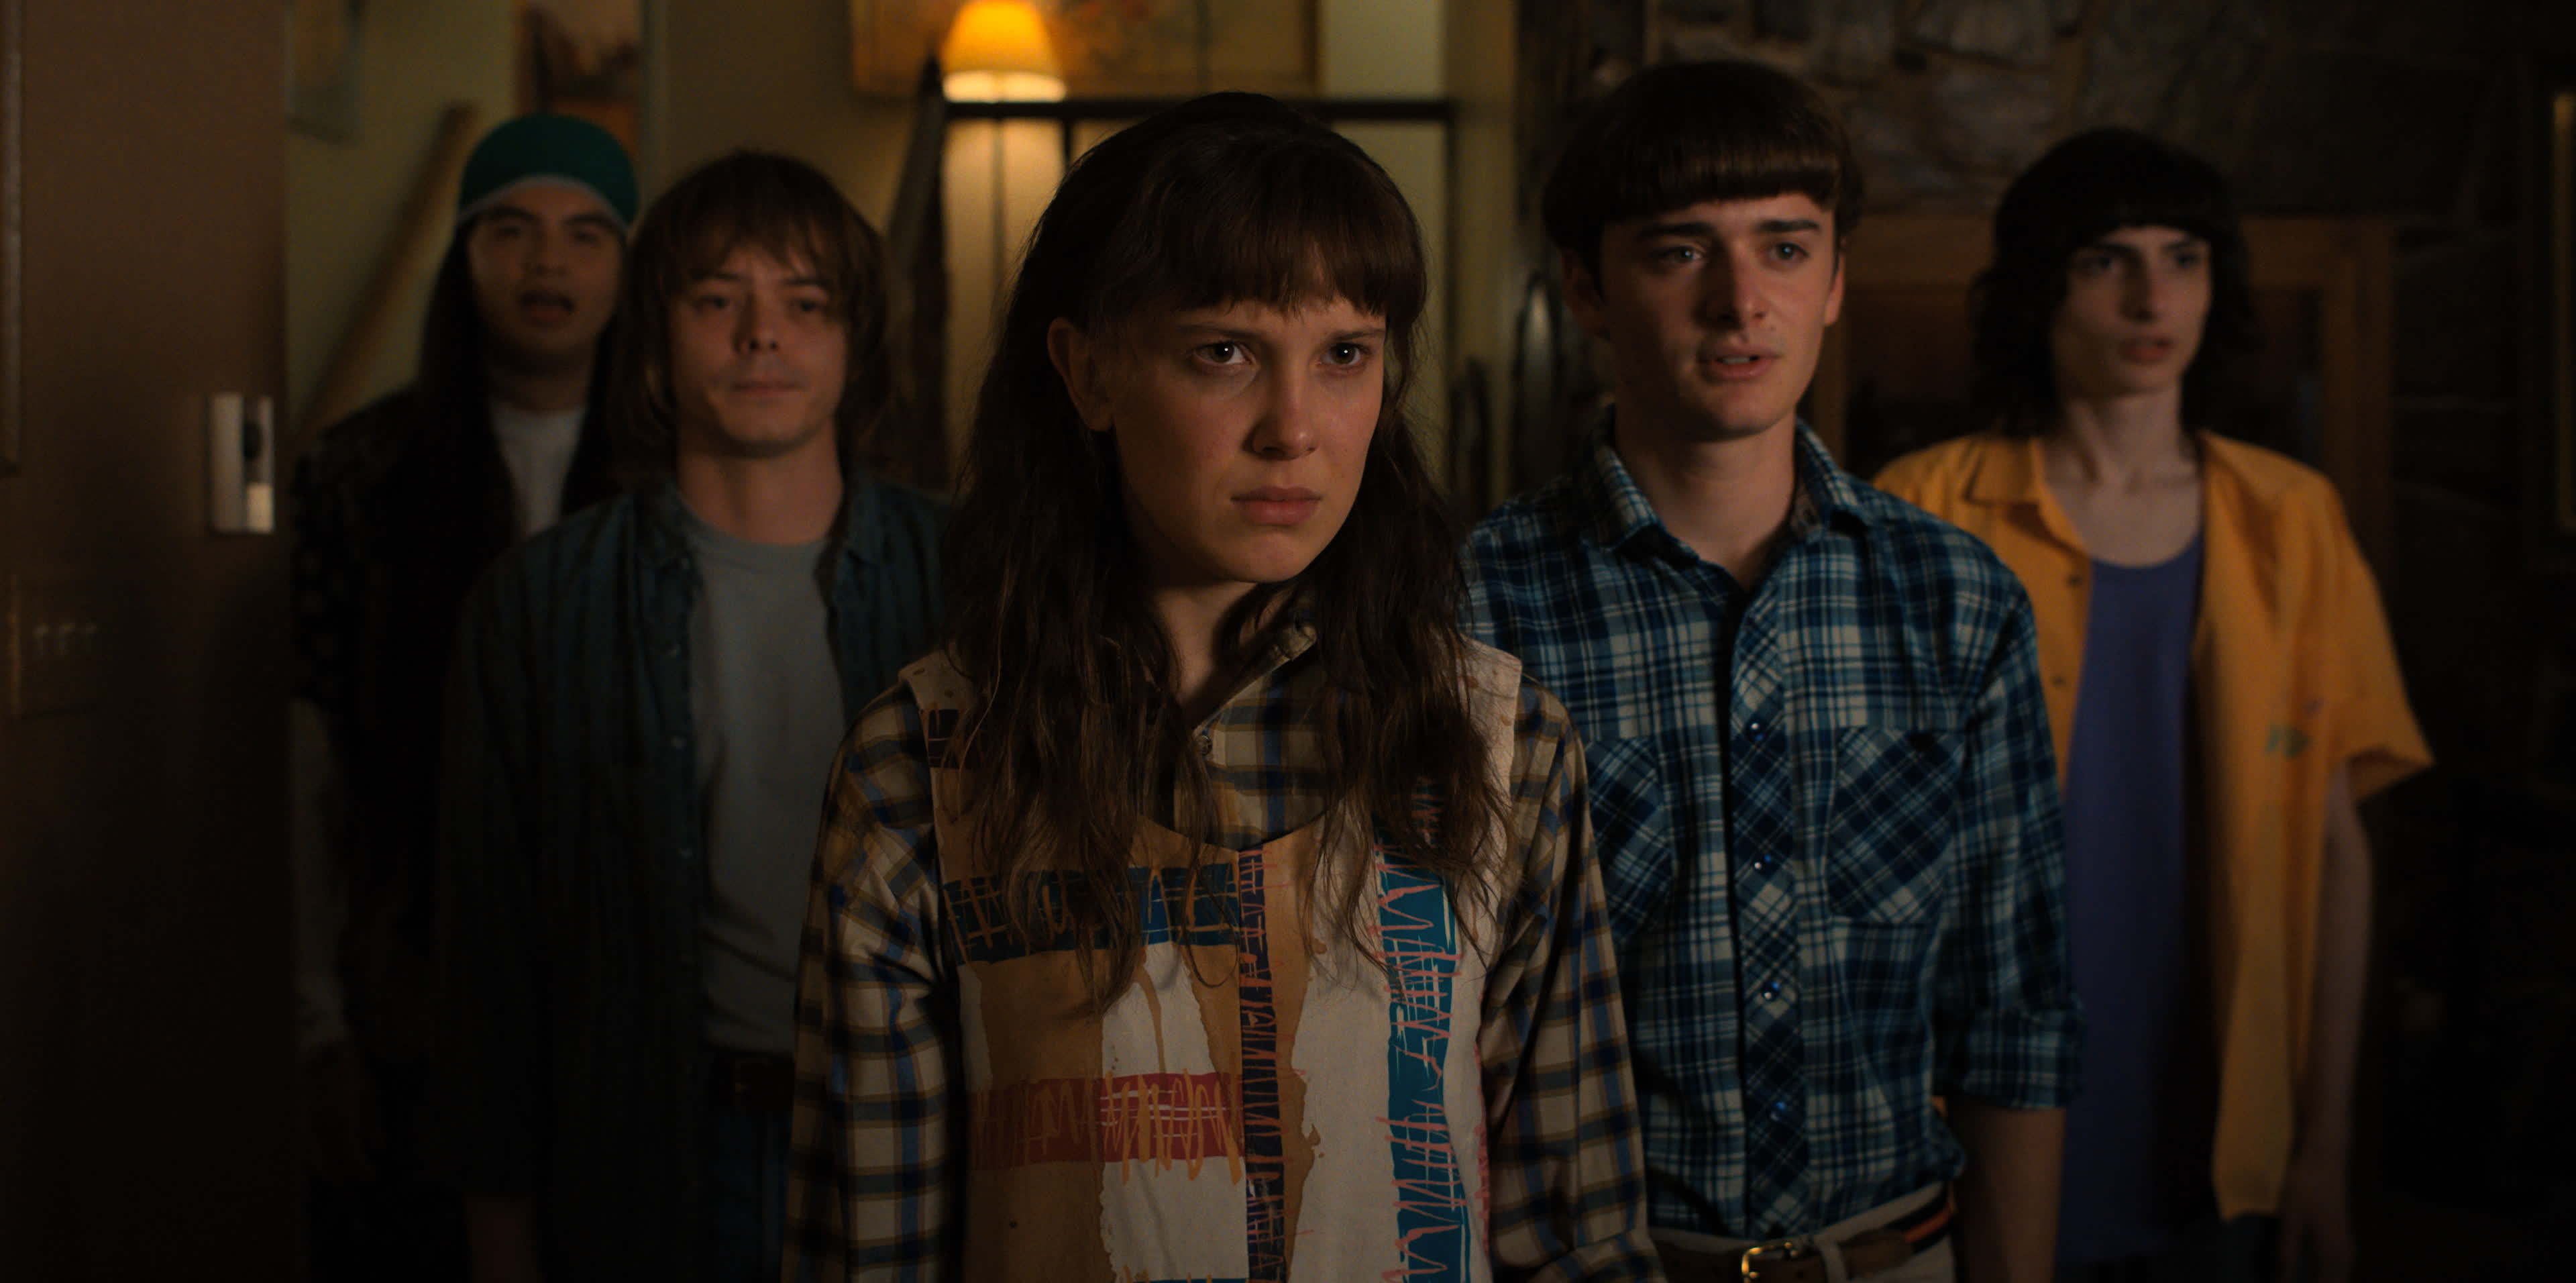 Stranger Things 4 has serious Nightmare on Elm Street vibes, and for good reason